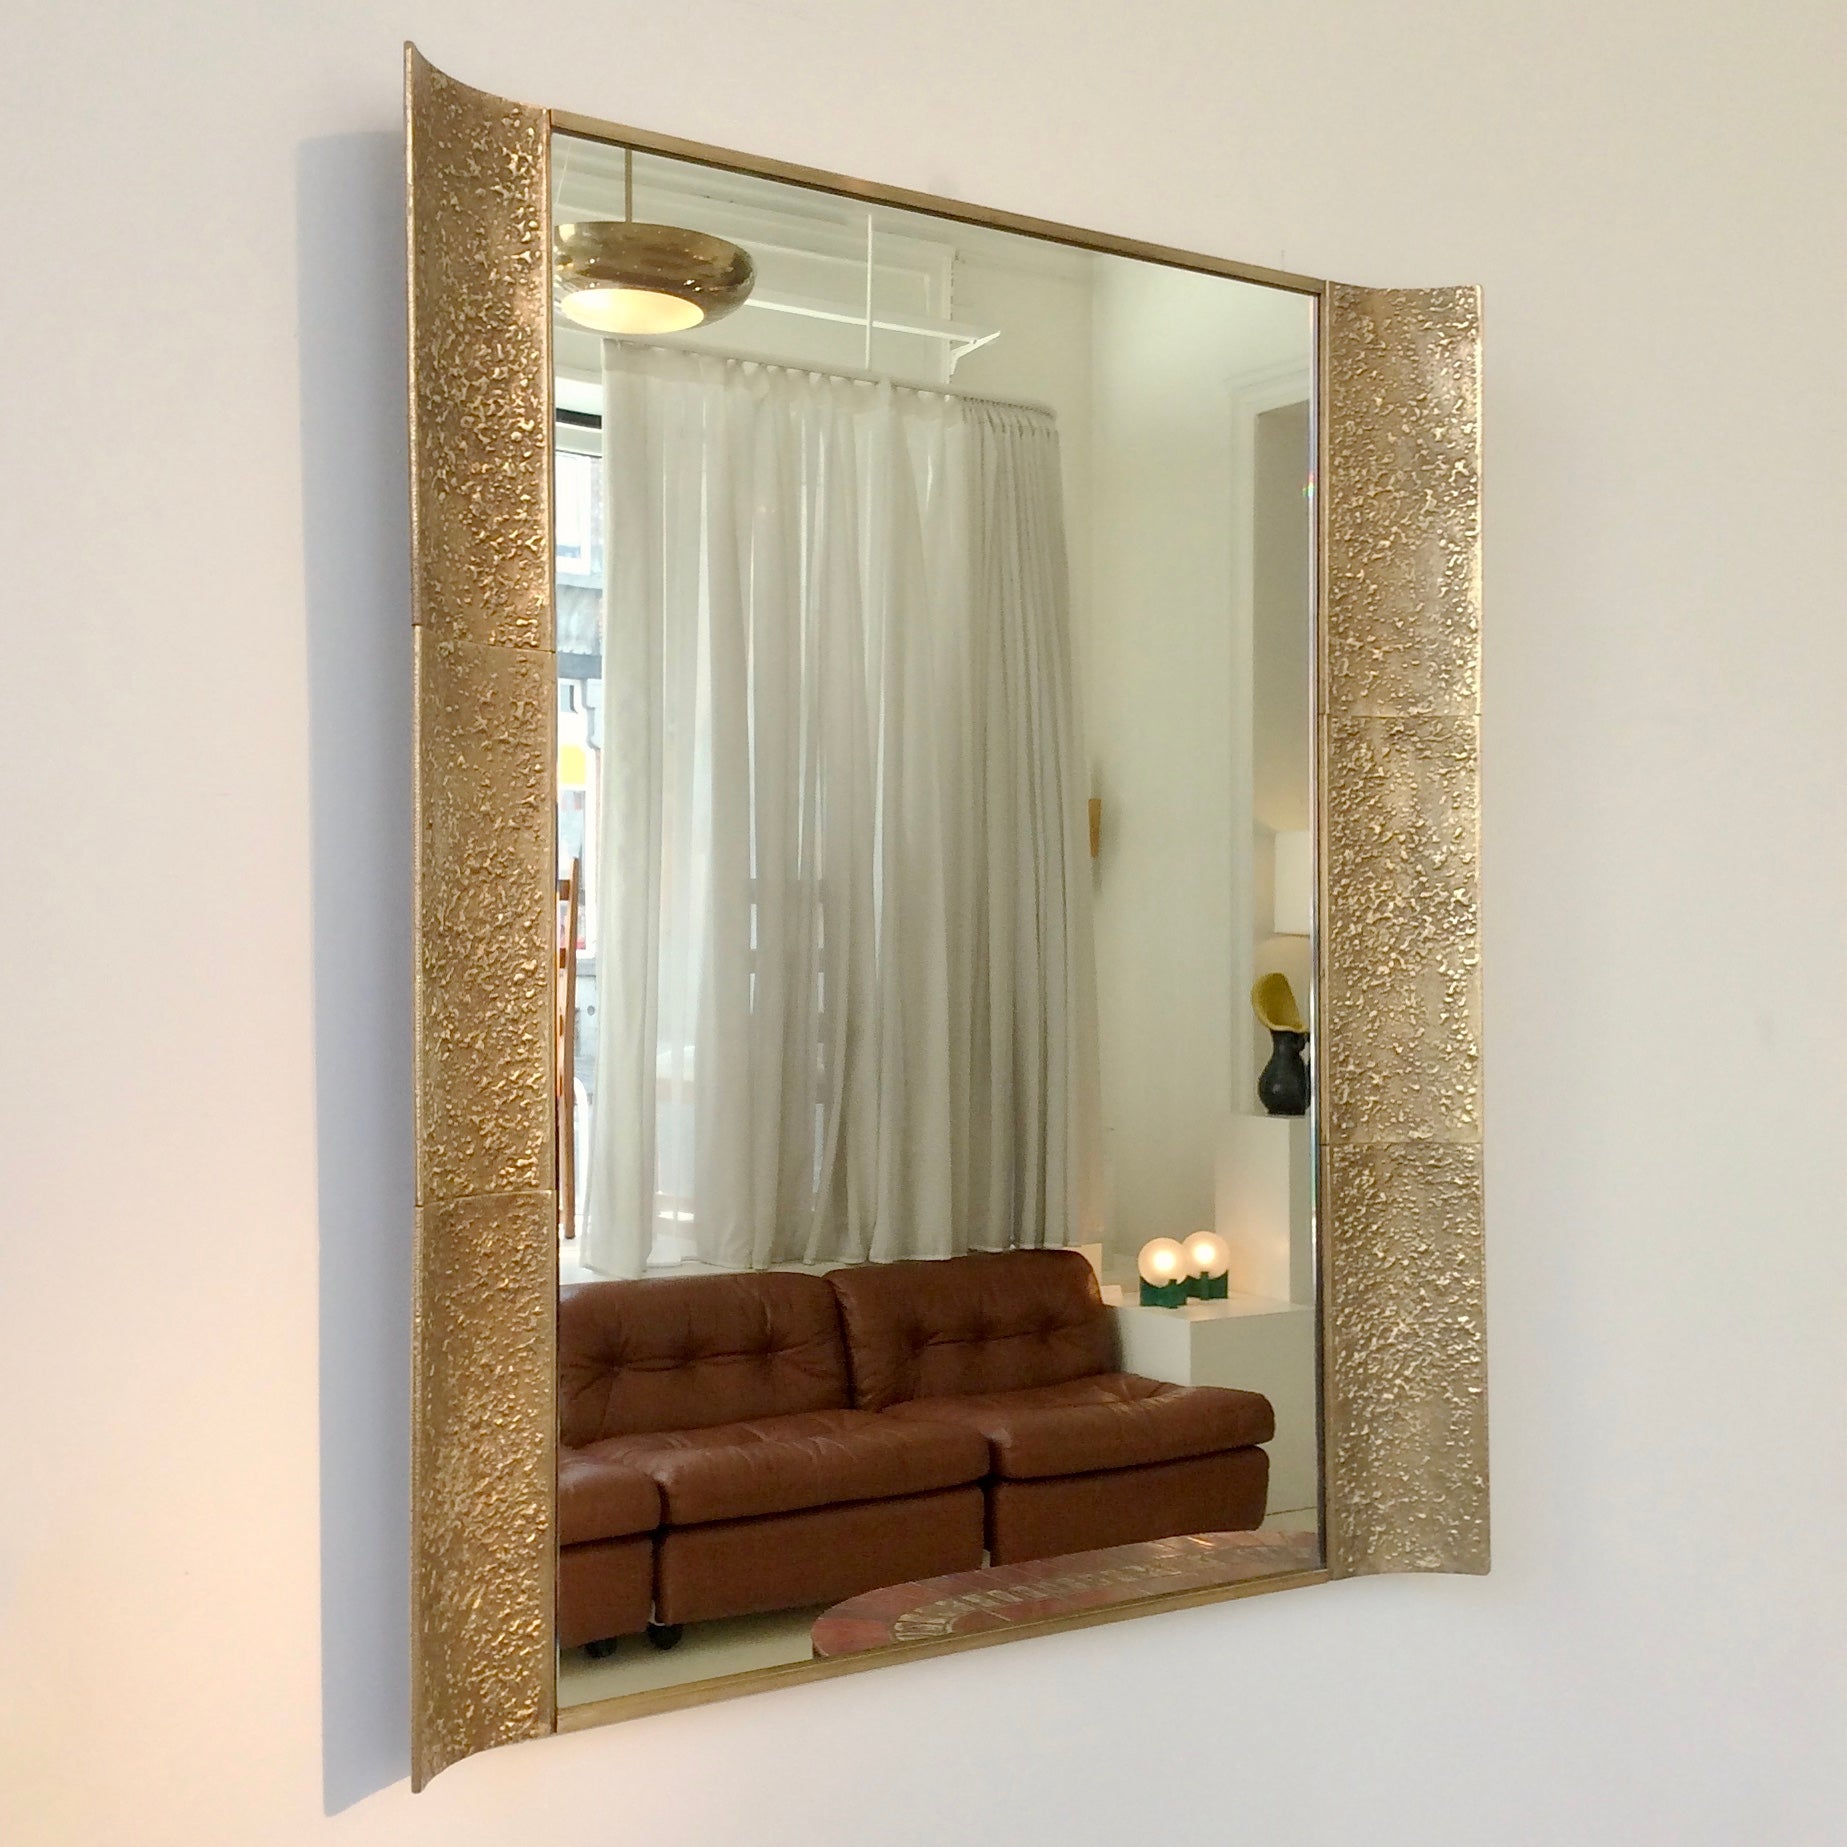 Rare and very beautiful large bronze wall mirror designed by Luciano Frigerio for Cellini Cantu, circa 1970, Italy.
High quality gilt bronze.
Dimensions: 90 cm H, 79 cm W, 8 cm D.
All purchases are covered by our Buyer Protection Guarantee.
This